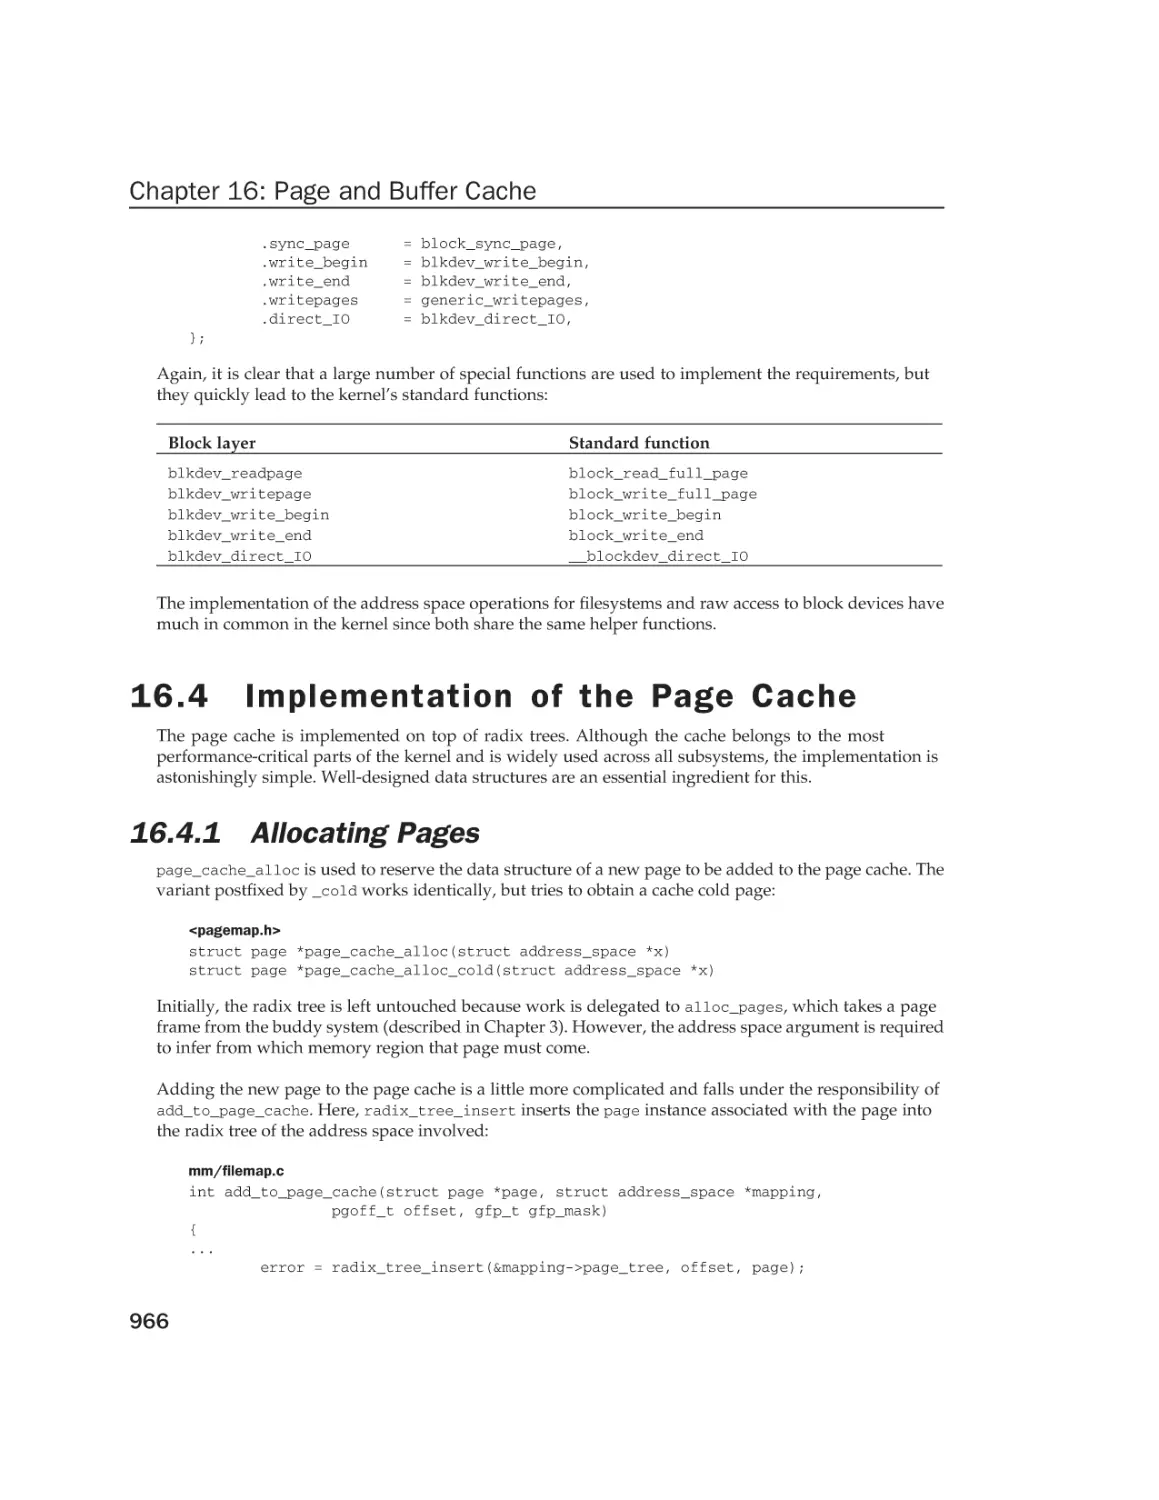 16.4 Implementation of the Page Cache